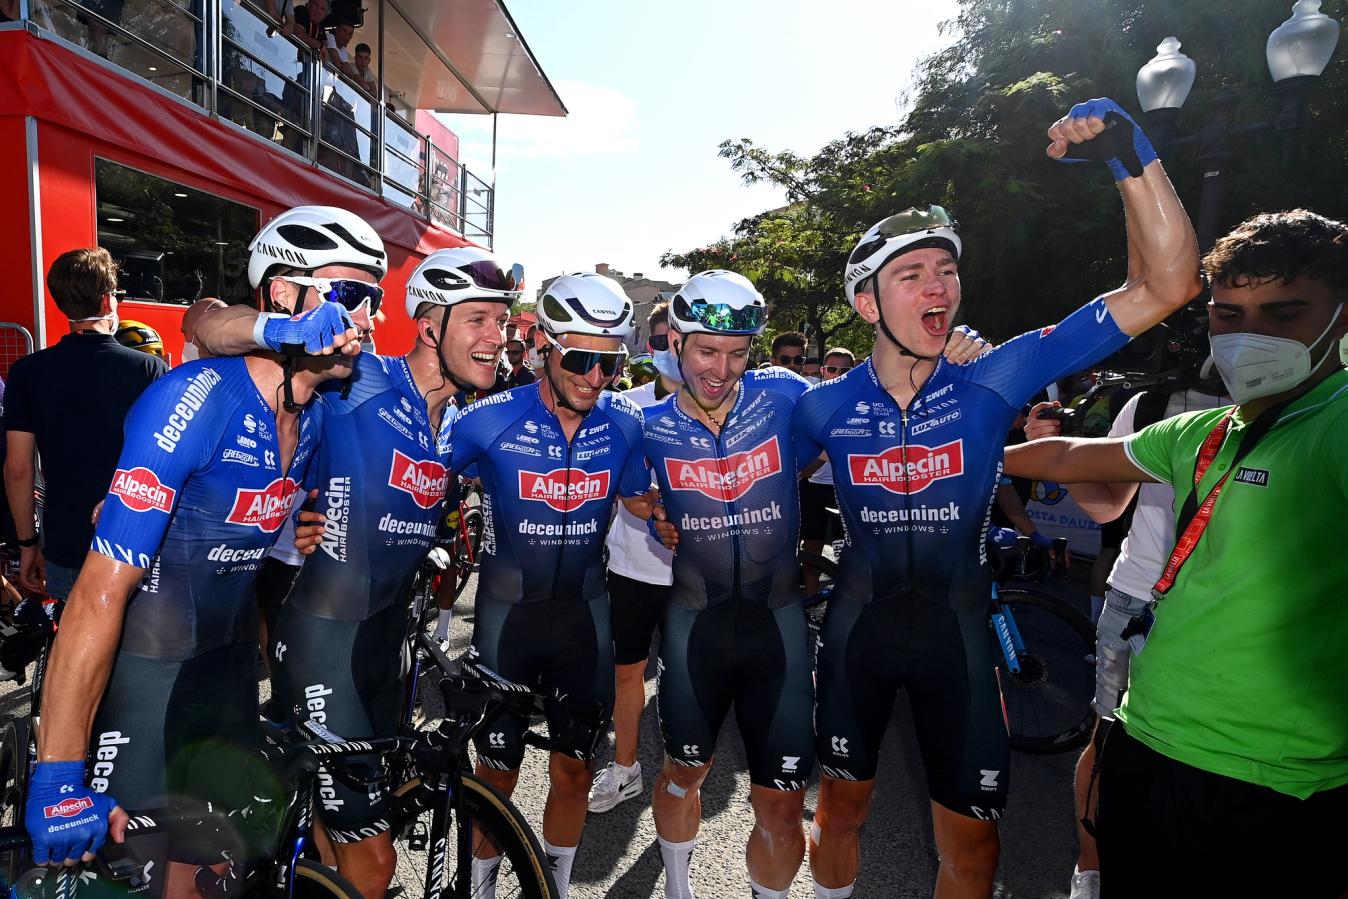 Sam Gaze helped deliver Kaden Groves and Alpecin-Deceuninck to the win on stage 4 of the Vuelta